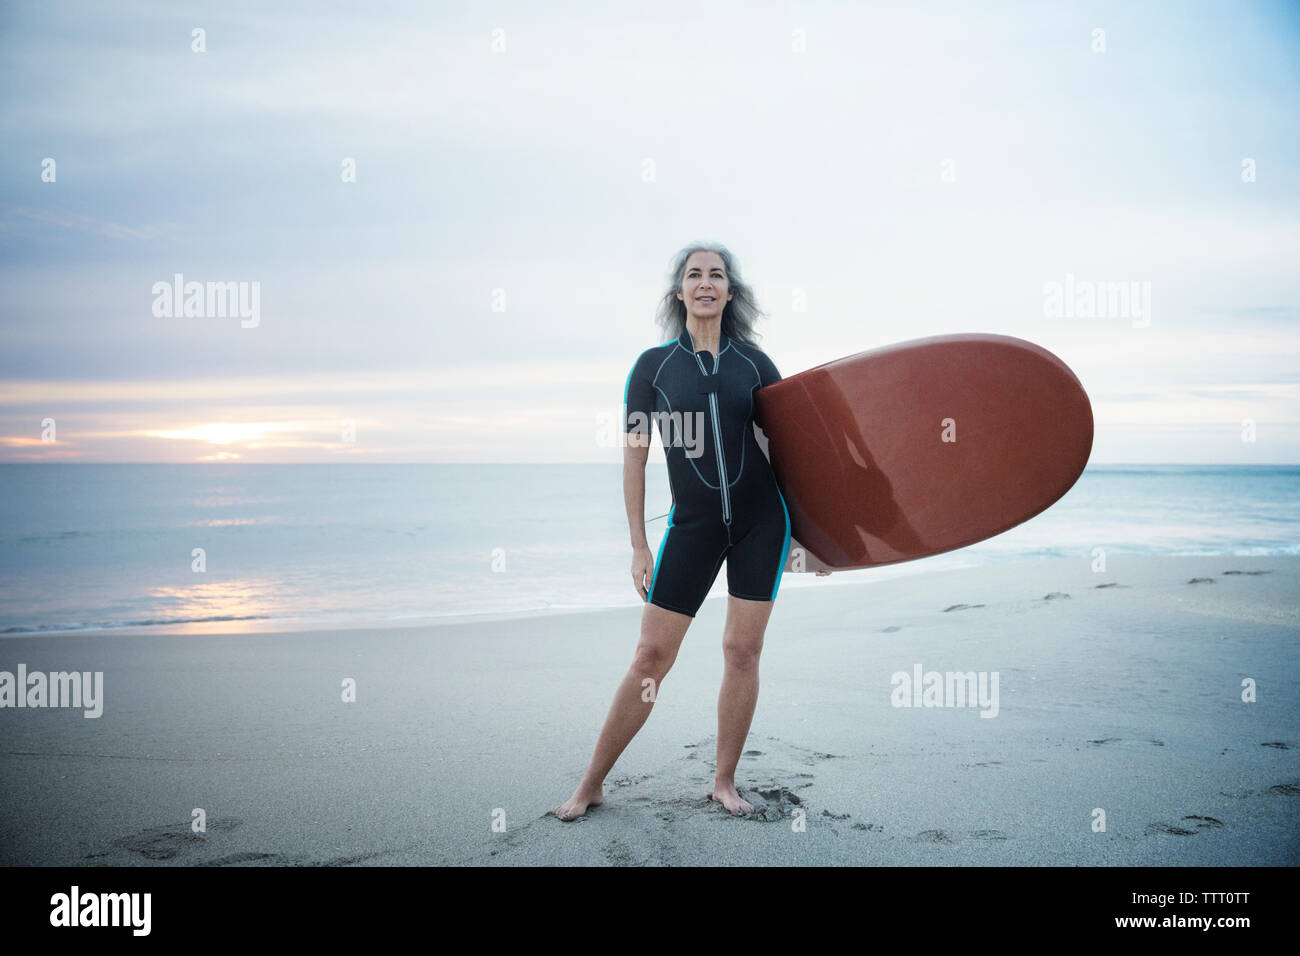 Full length portrait of confident female surfer carrying surfboard at Delray Beach Stock Photo